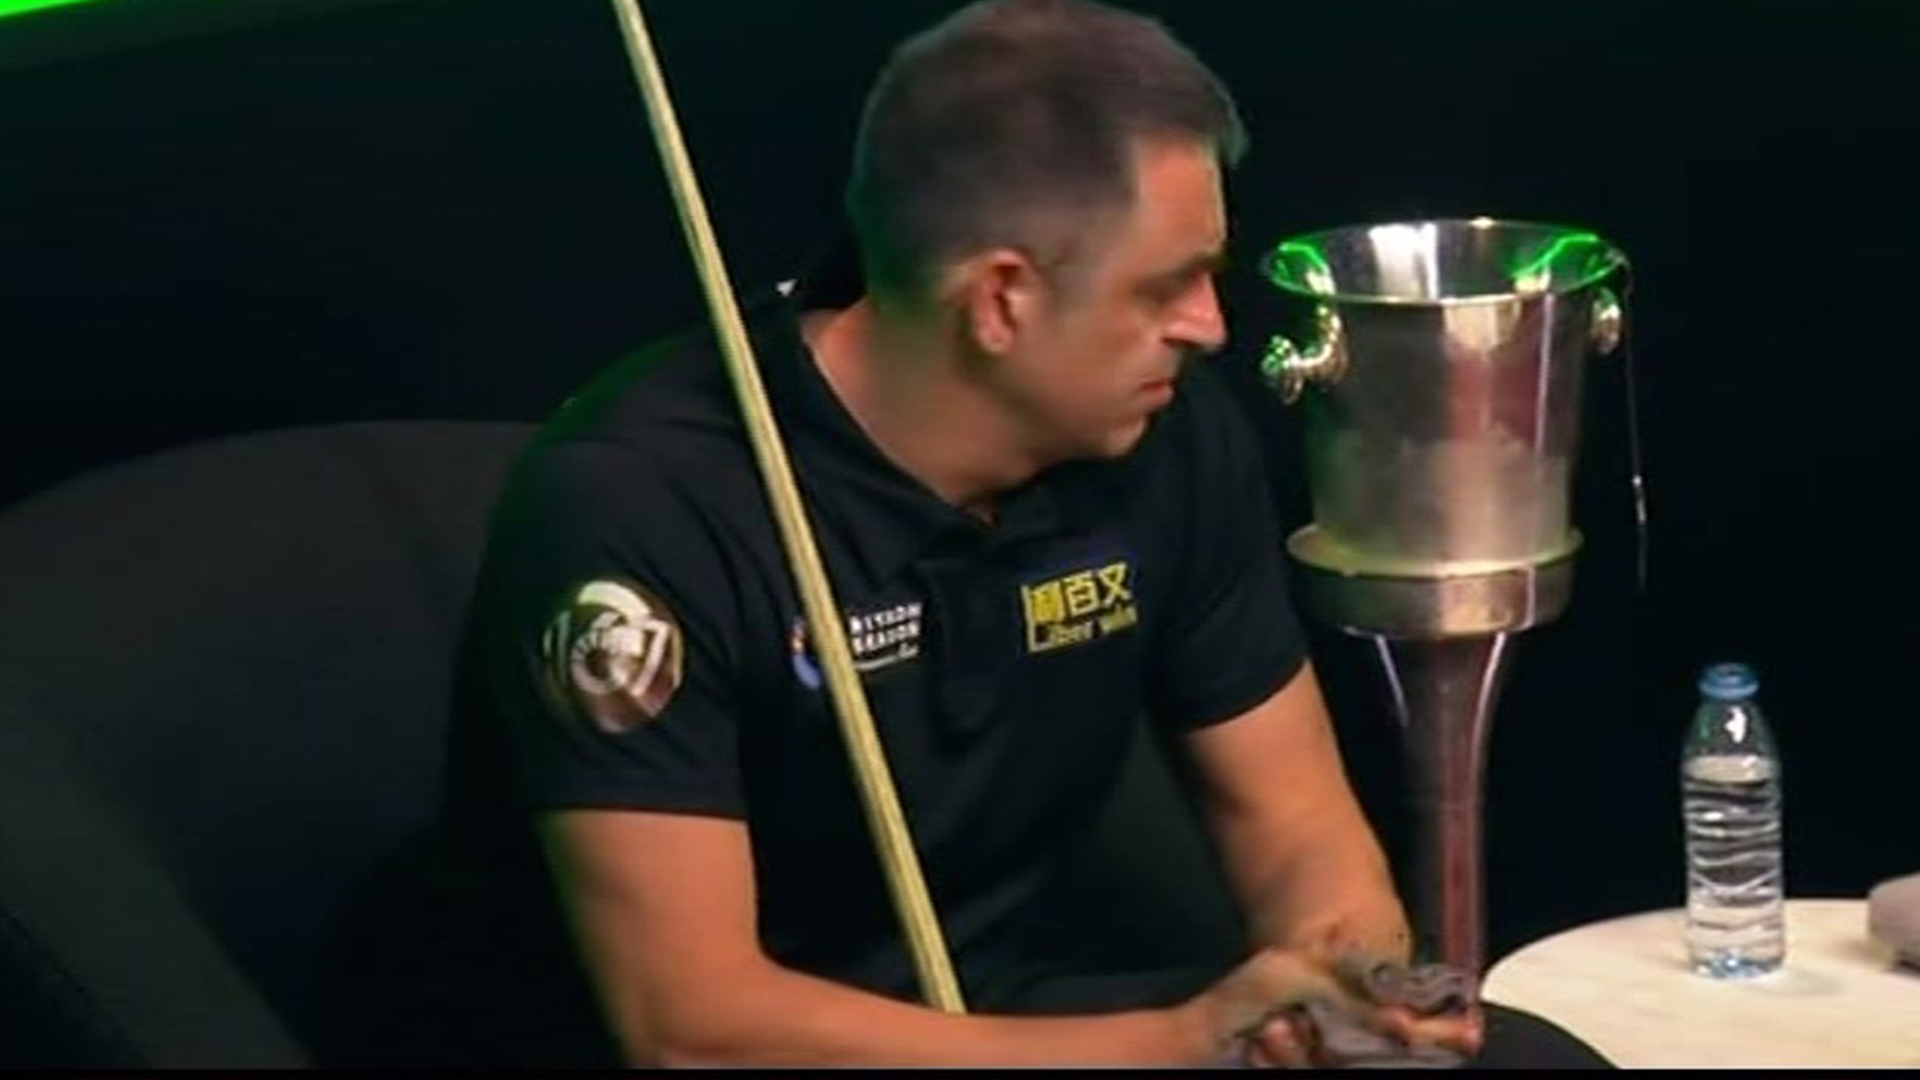 Ronnie O’Sullivan appears to make major change to appearance at snooker tournament in Saudi Arabia – did you spot it? [Video]